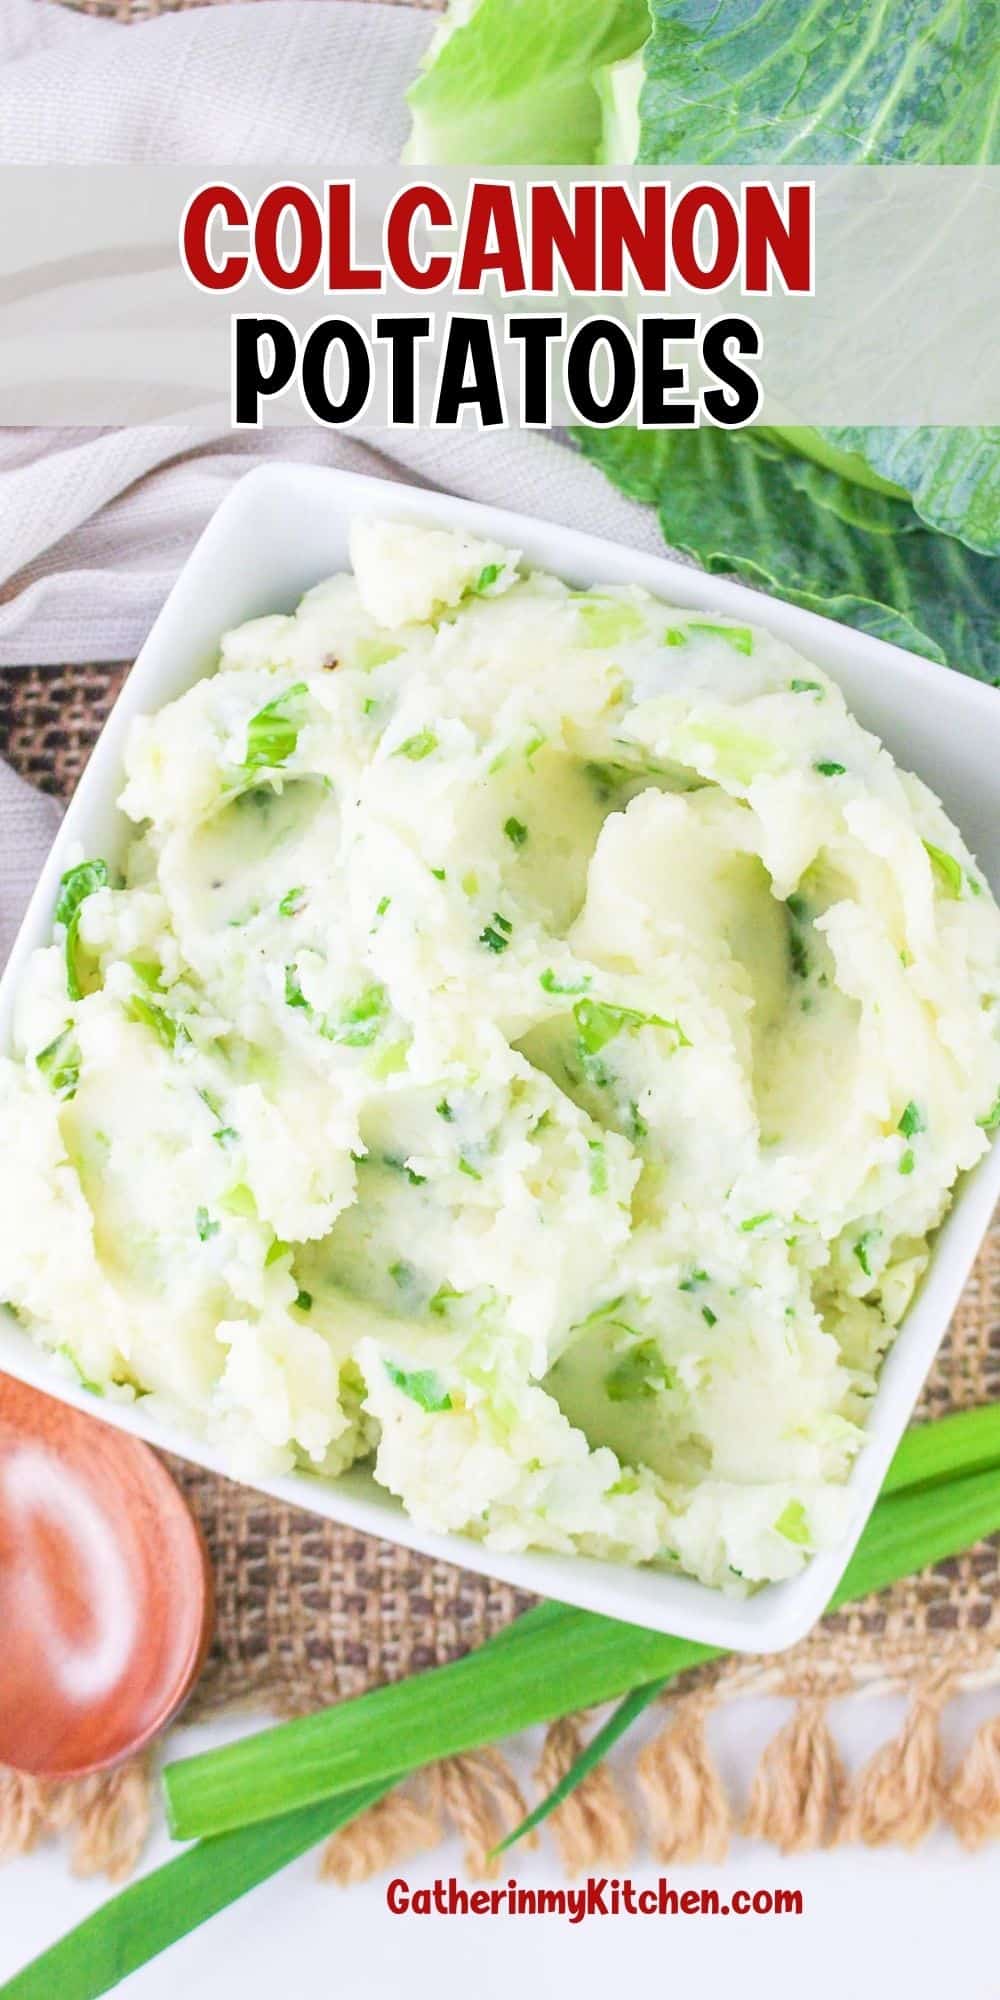 Pin image: colcannon potatoes with the words "colcannon potatoes" over the top.